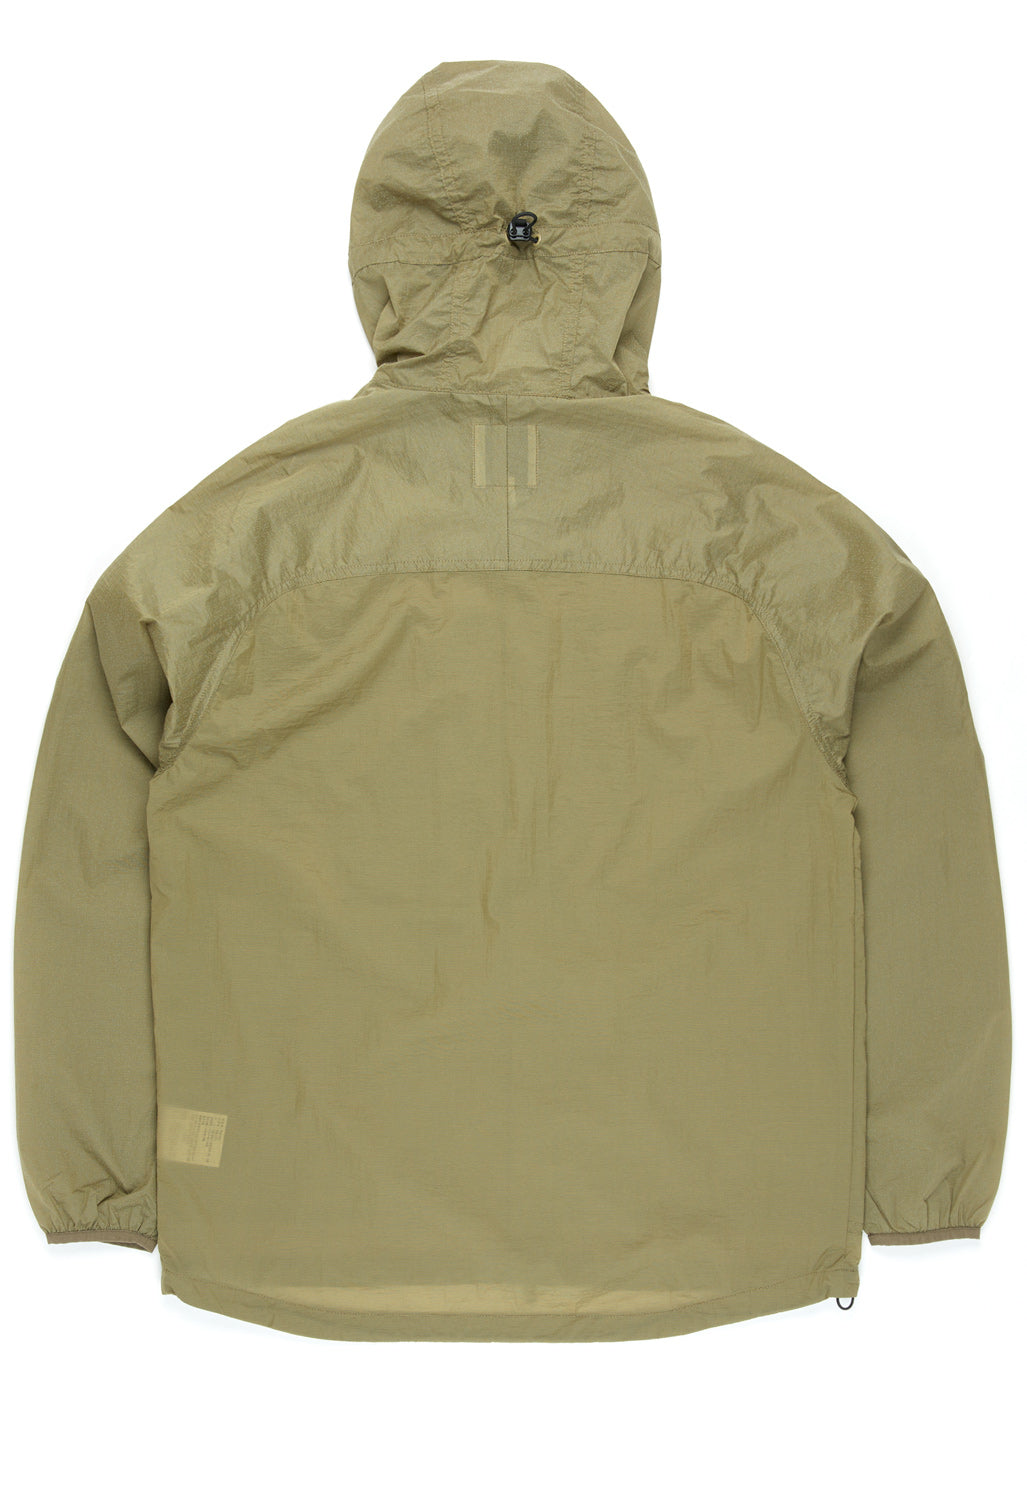 CAYL Reflect Wind Jacket  - Sand Brown